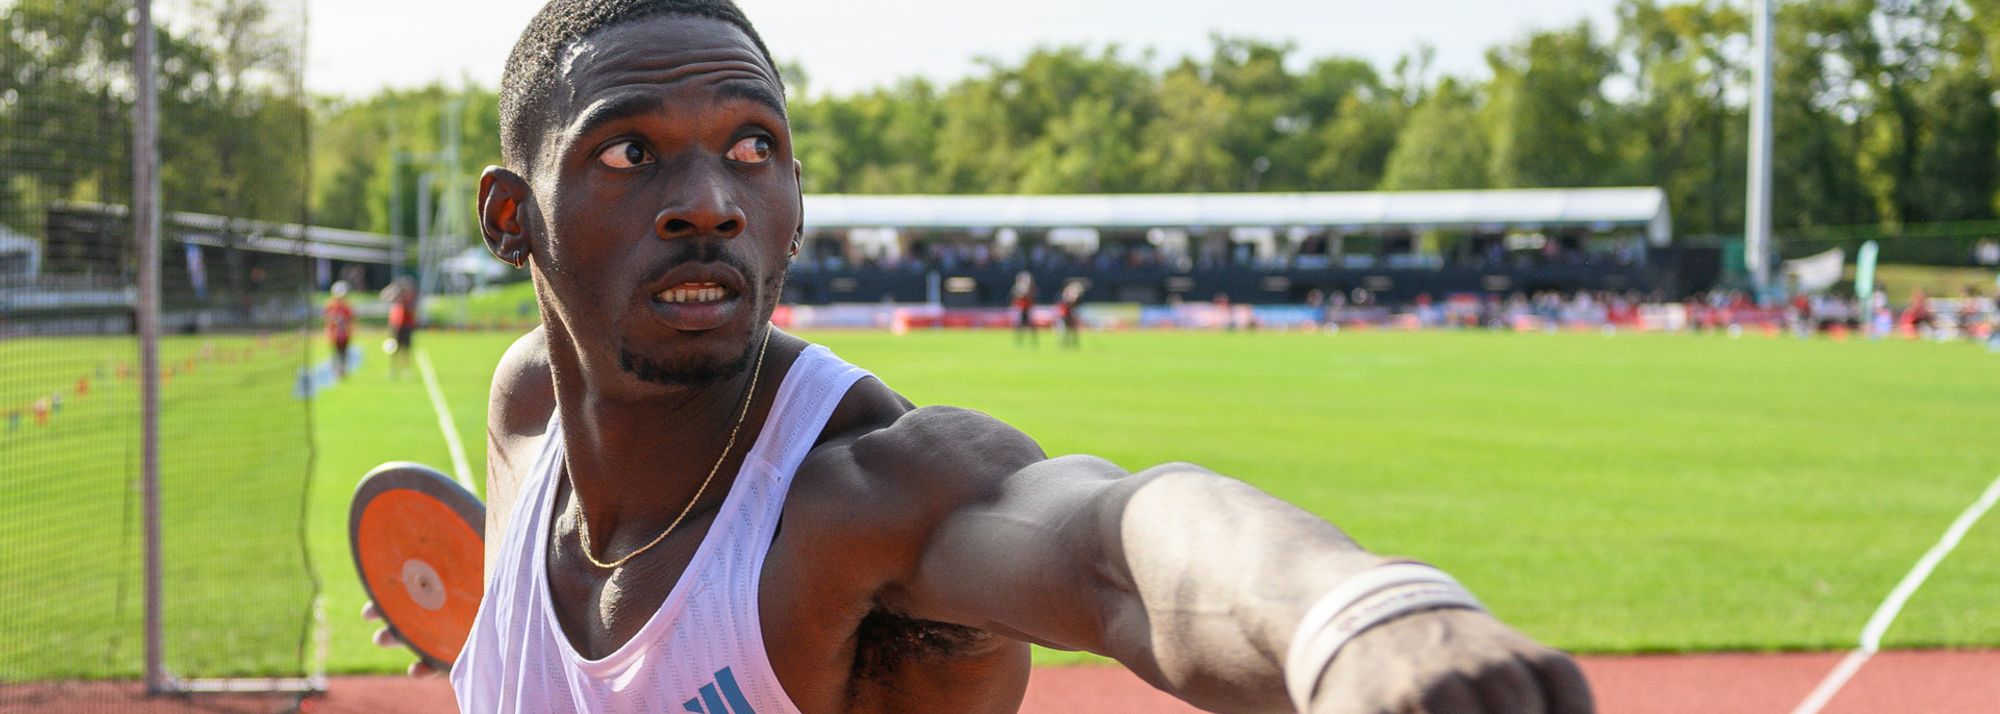 Victor sets Grenadian record of 8550, Dadic and Oosterwegel tie with 6233 as the World Athletics Combined Events Tour comes to a close in Talence